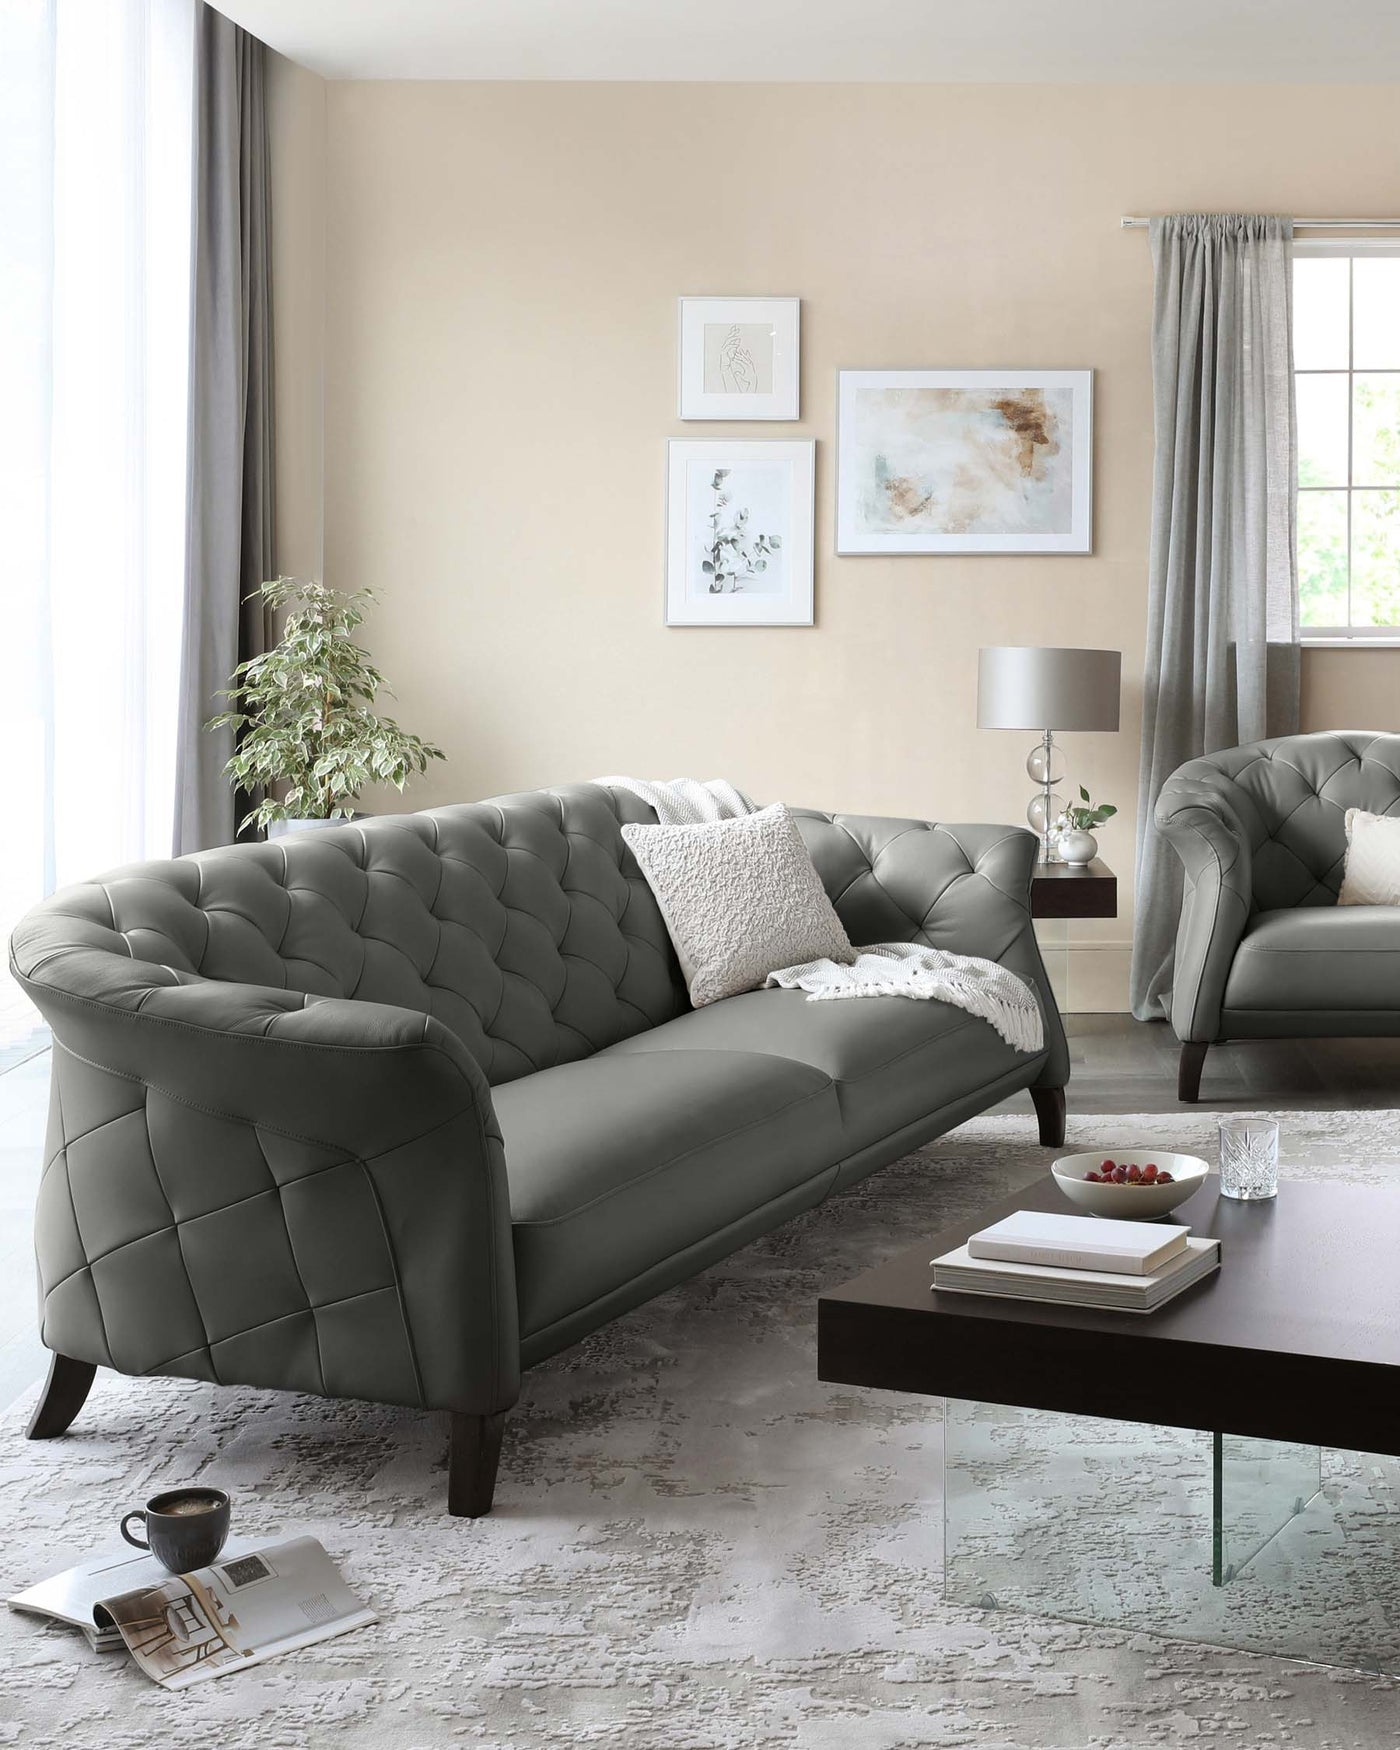 Elegant living room set featuring a tufted dark grey sofa with matching armchair, complemented by a modern dark brown rectangular coffee table with a glass bottom shelf. The room is accented with a soft textured area rug, simplistic white-and-silver decorative pillows, and a small round side table supporting a contemporary lamp with a grey shade.